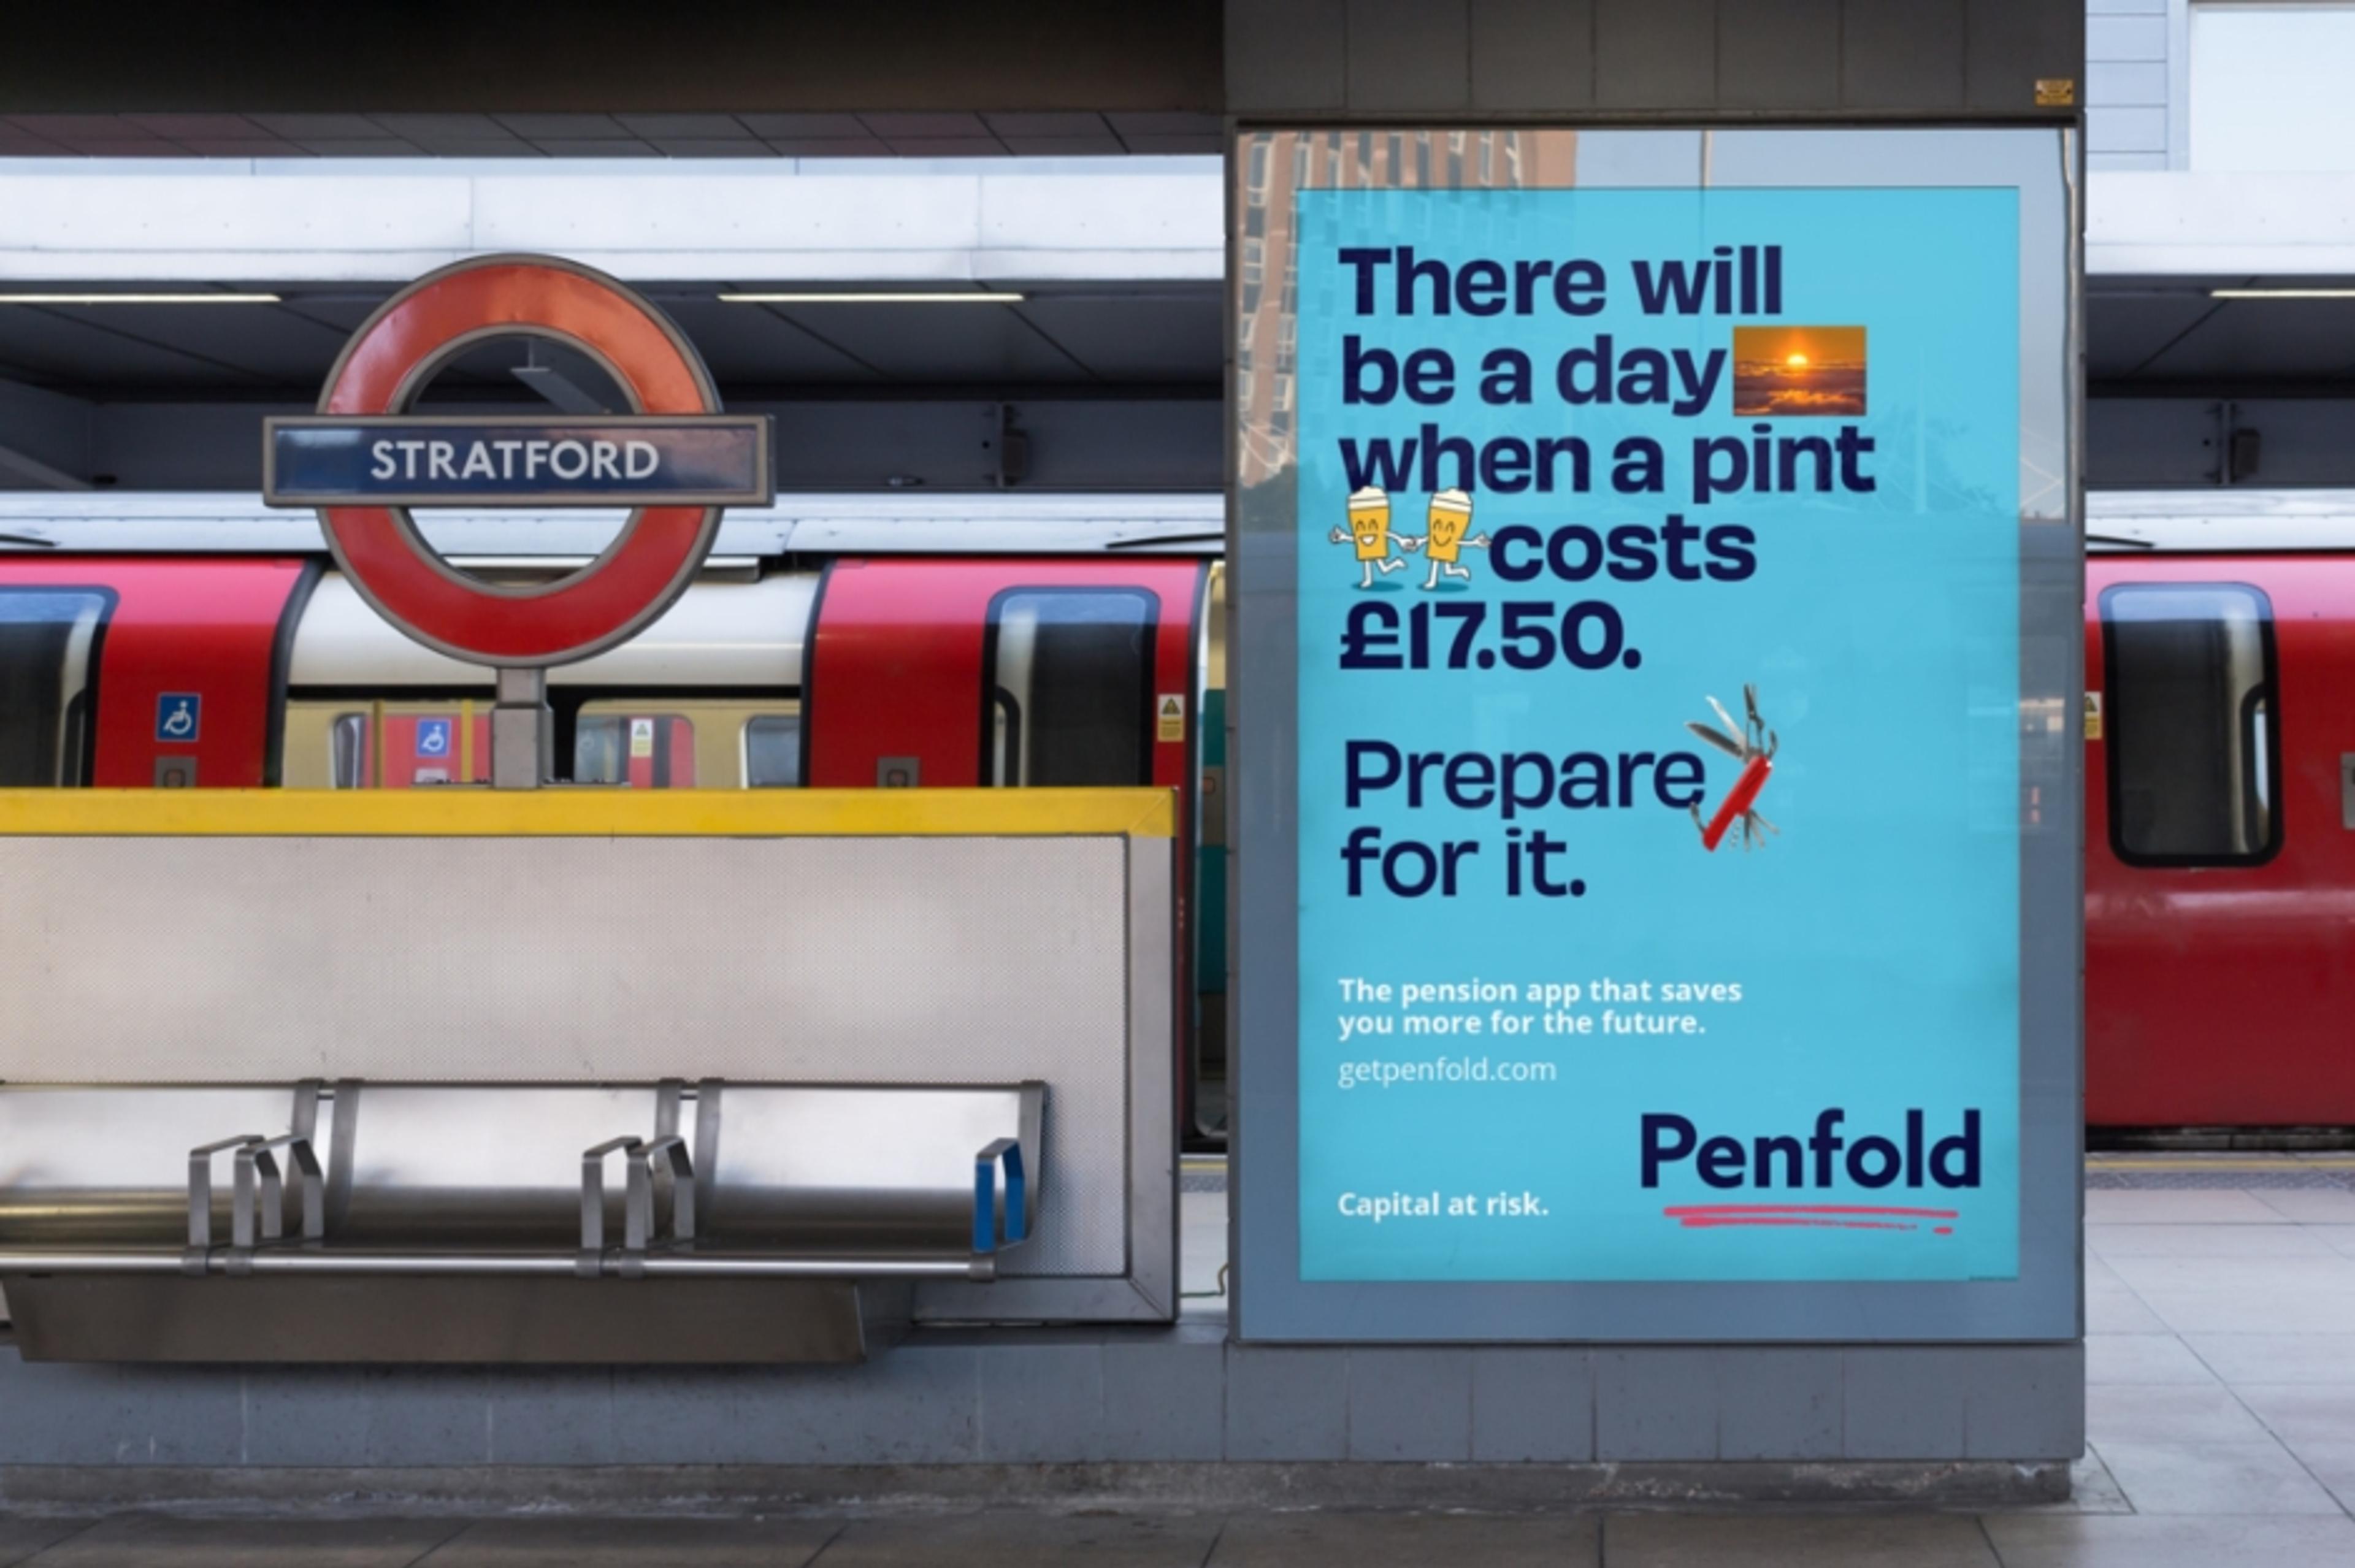 A photo of a Penfold advert at a London underground station